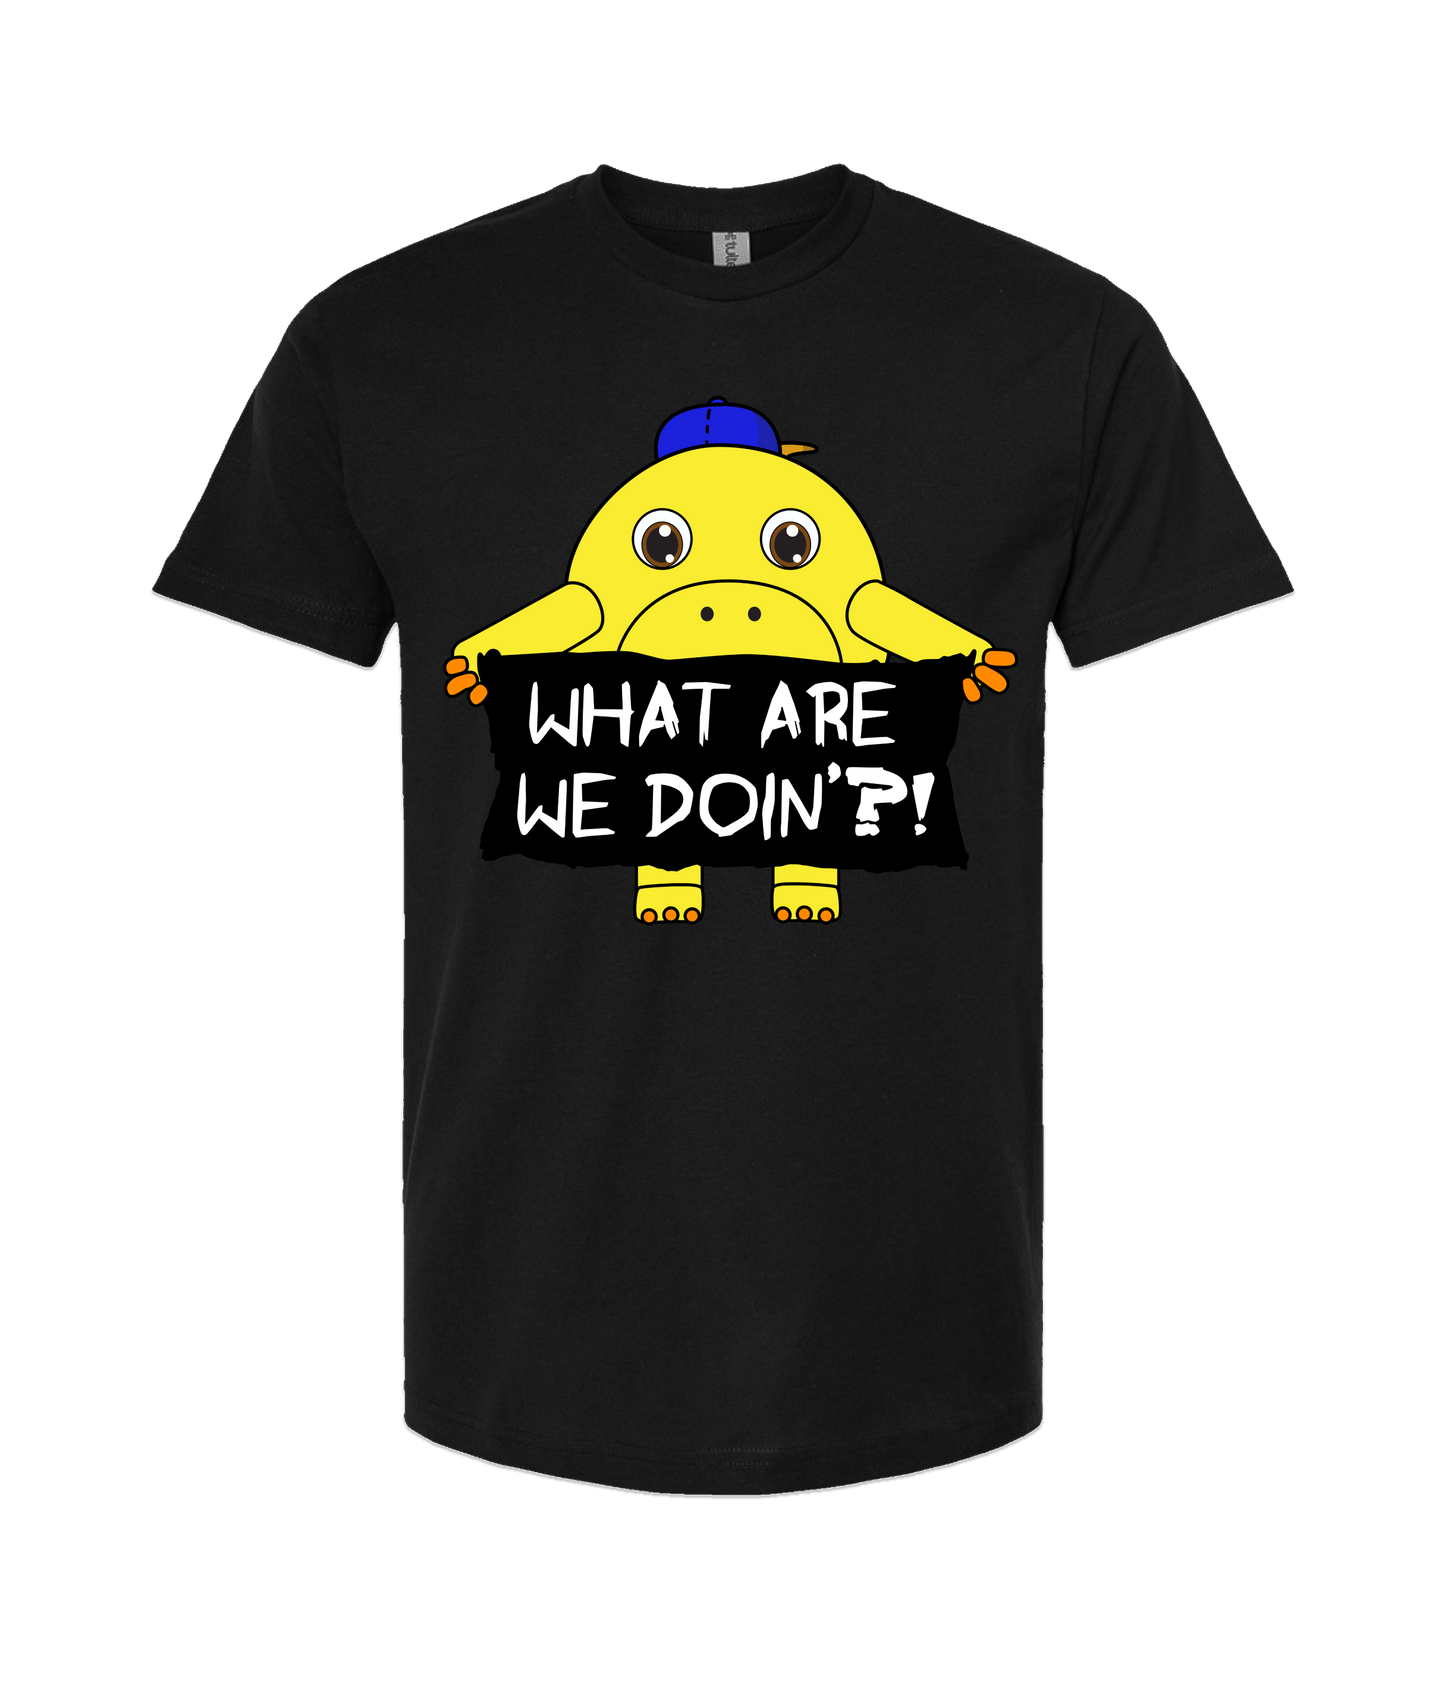 The Philly Captain's Merch is Fire - WHAT ARE WE DOIN' ?! - Black T-Shirt